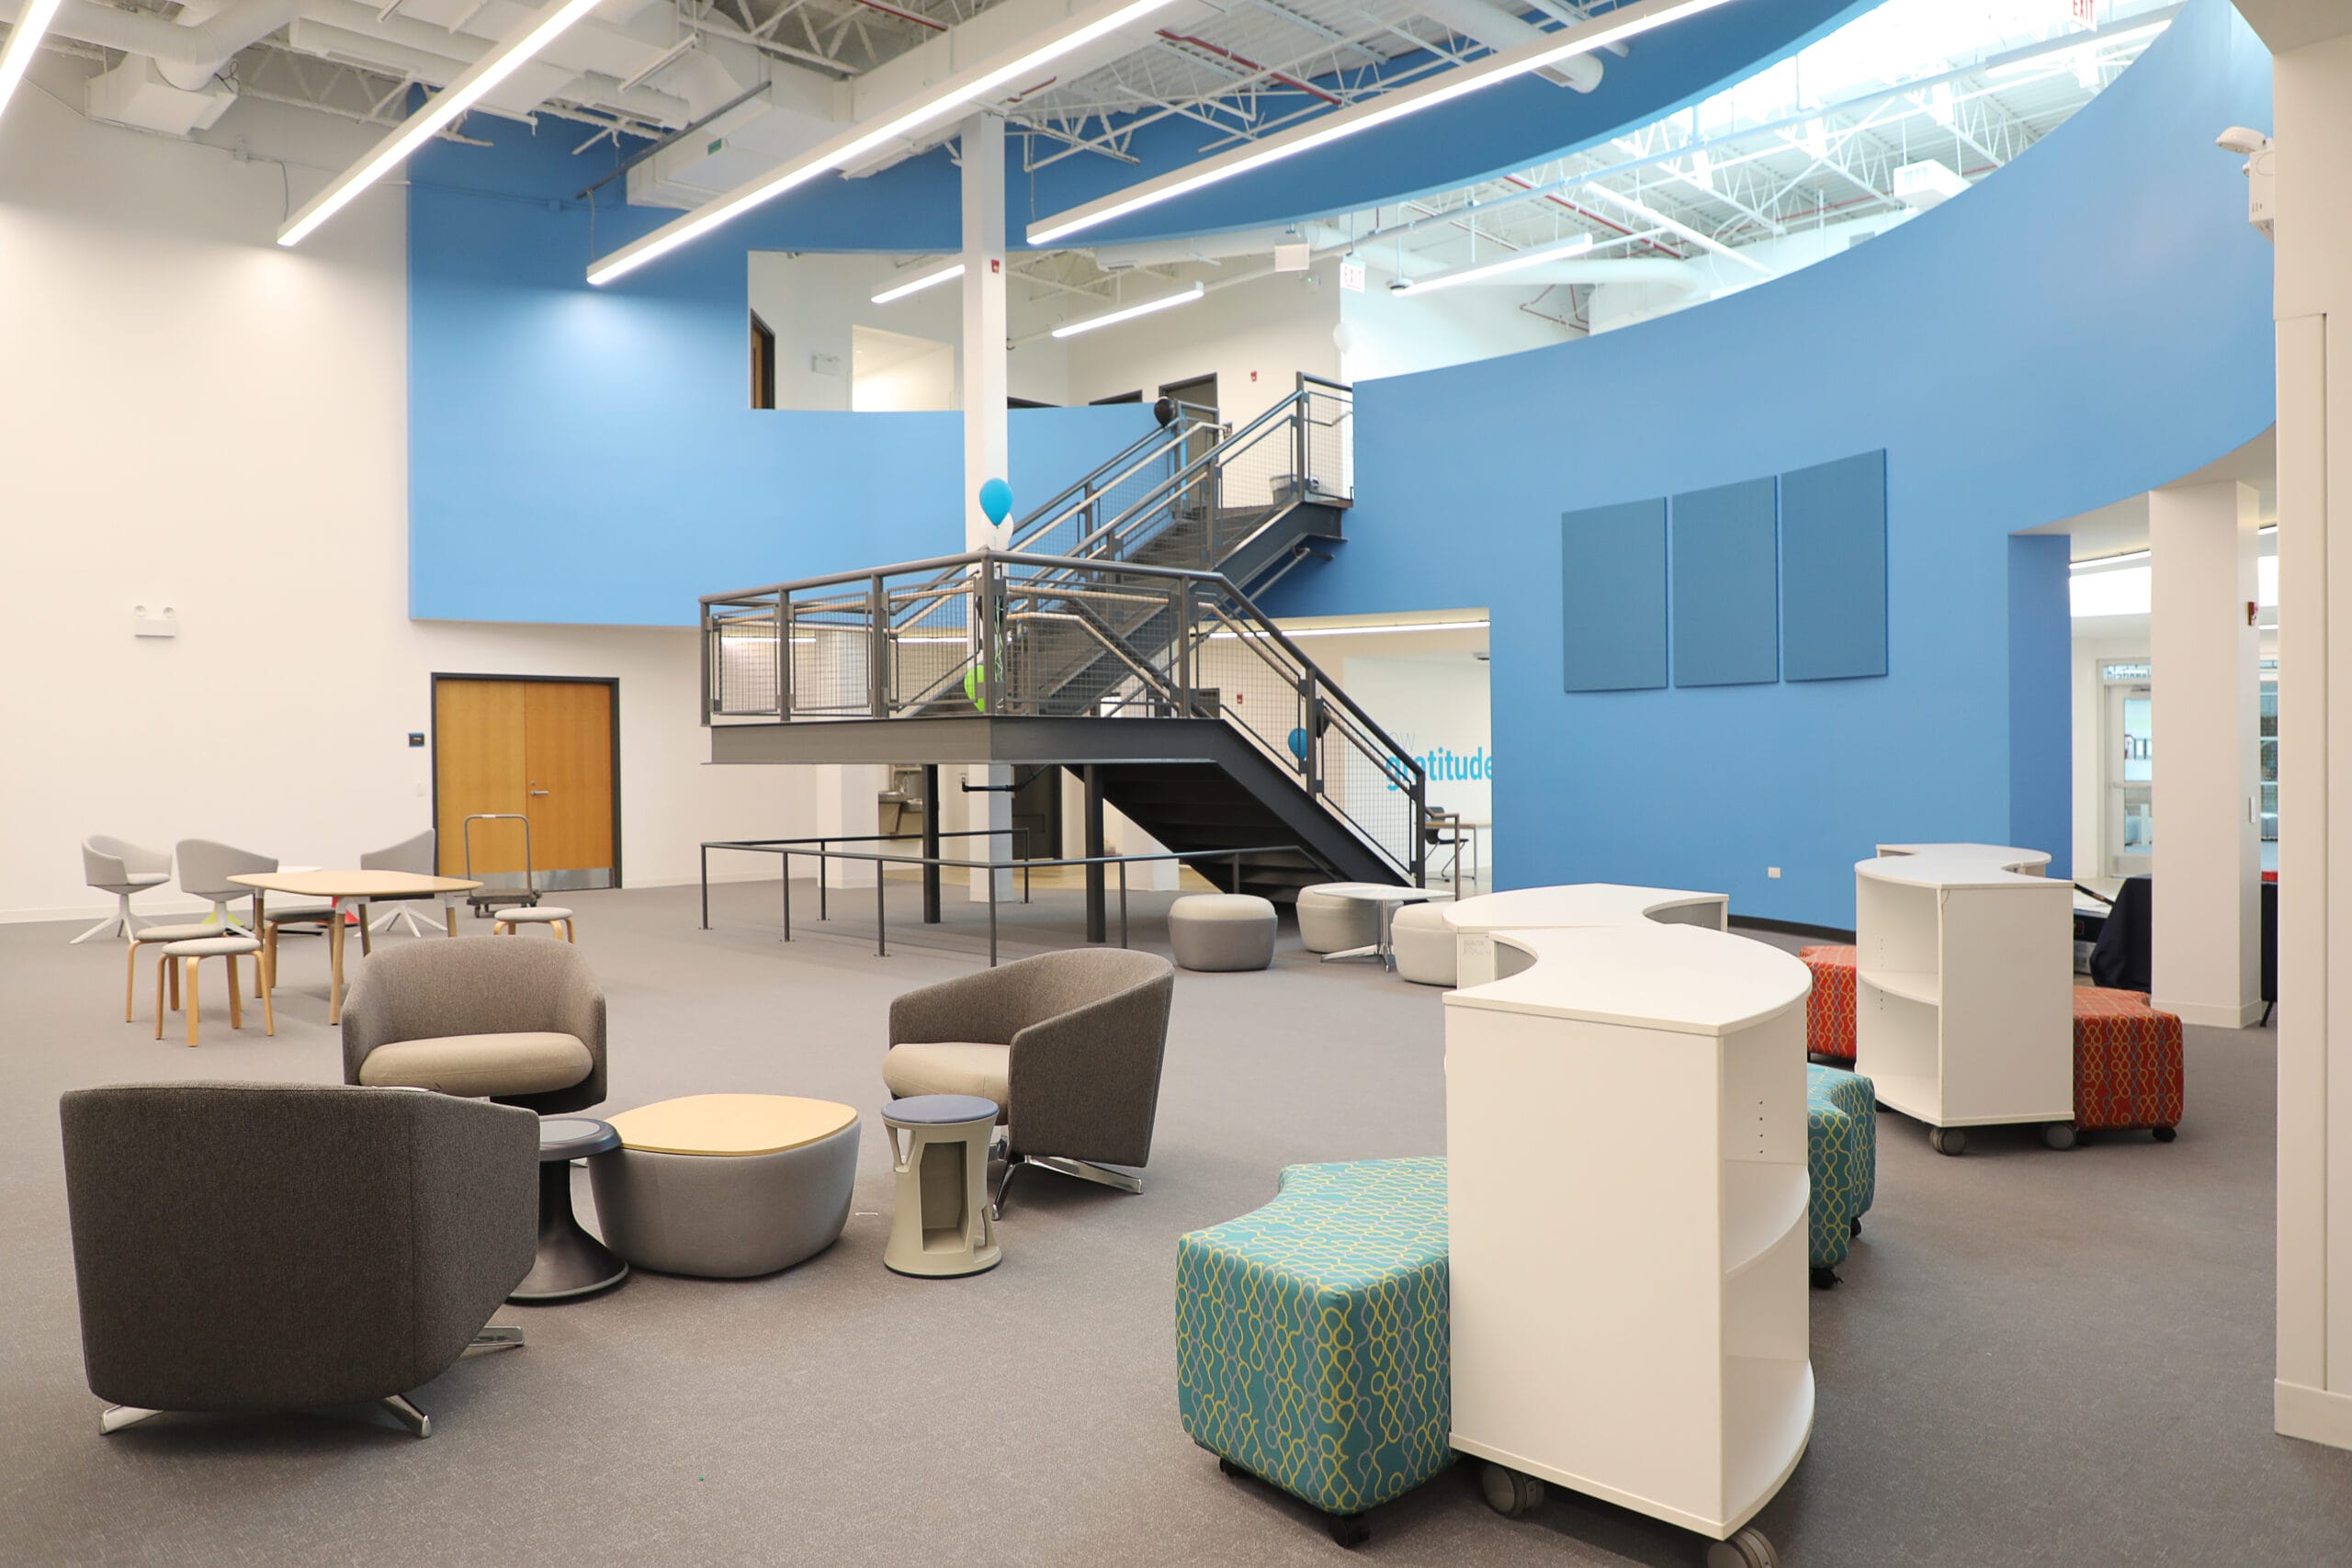 Skender Completes 100,000-SF Renovation for New South Side Charter School